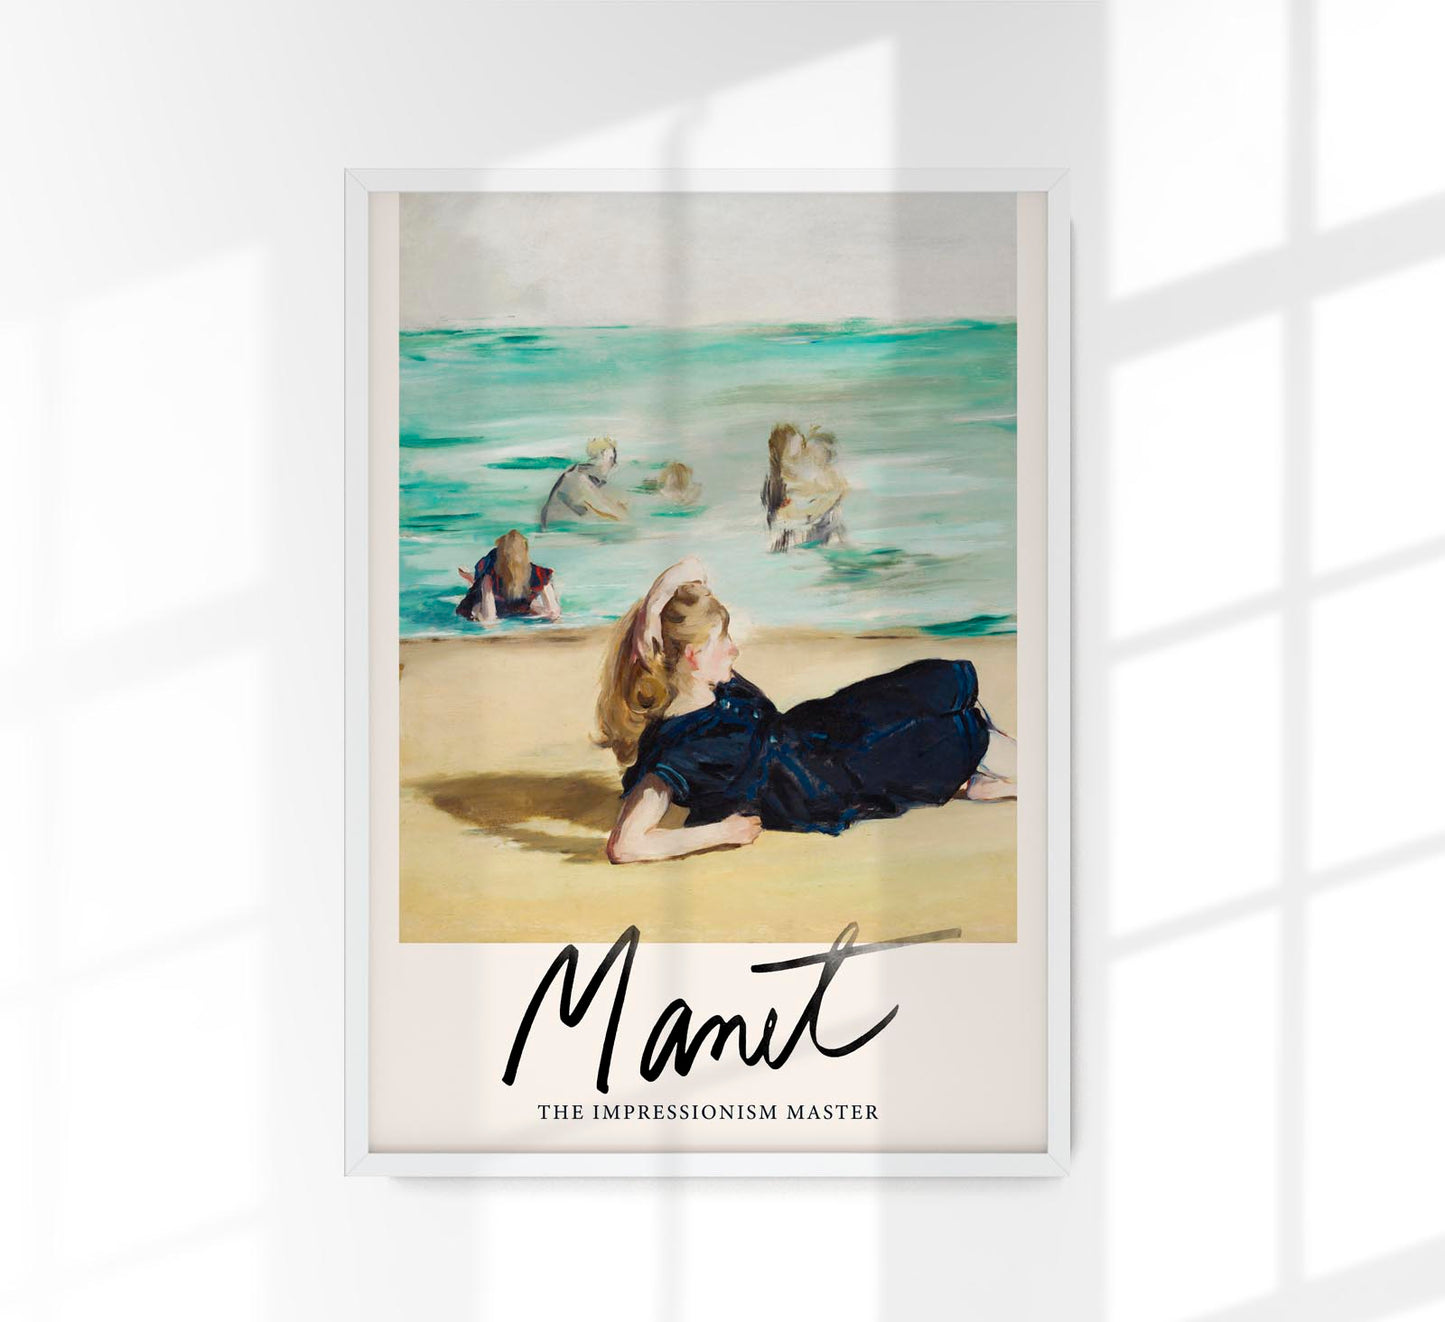 On the Beach by Manet Exhibition Poster